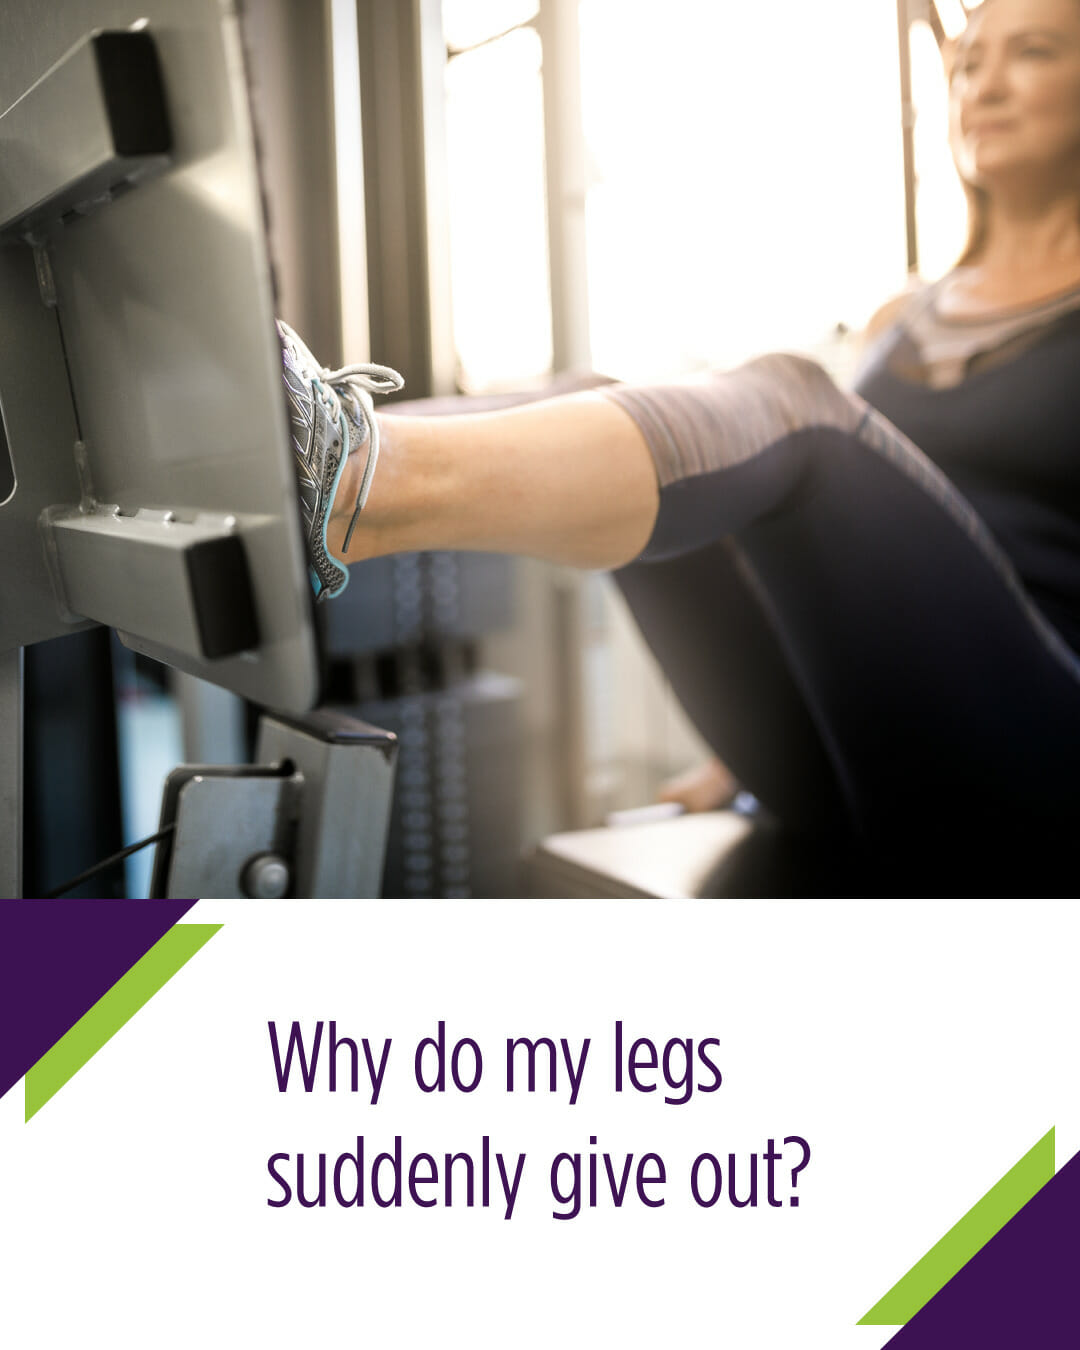 Correlaat kapok ZuidAmerika Ask Dr. Choi: Why Do Legs Give Out Without Warning? | Summit Orthopedics